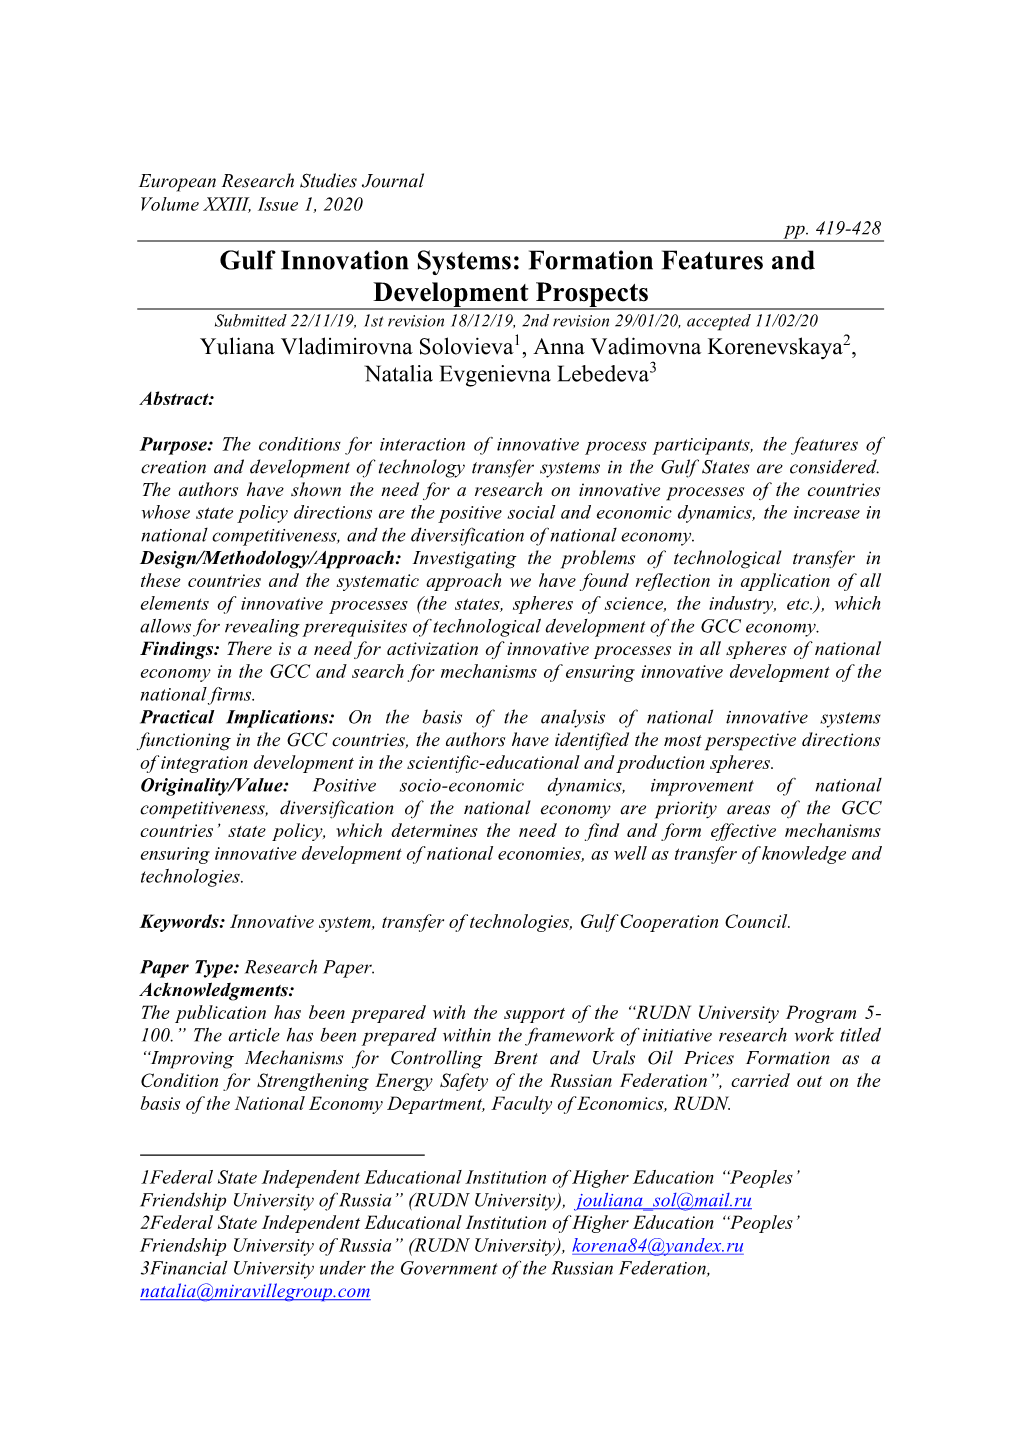 Gulf Innovation Systems: Formation Features and Development Prospects